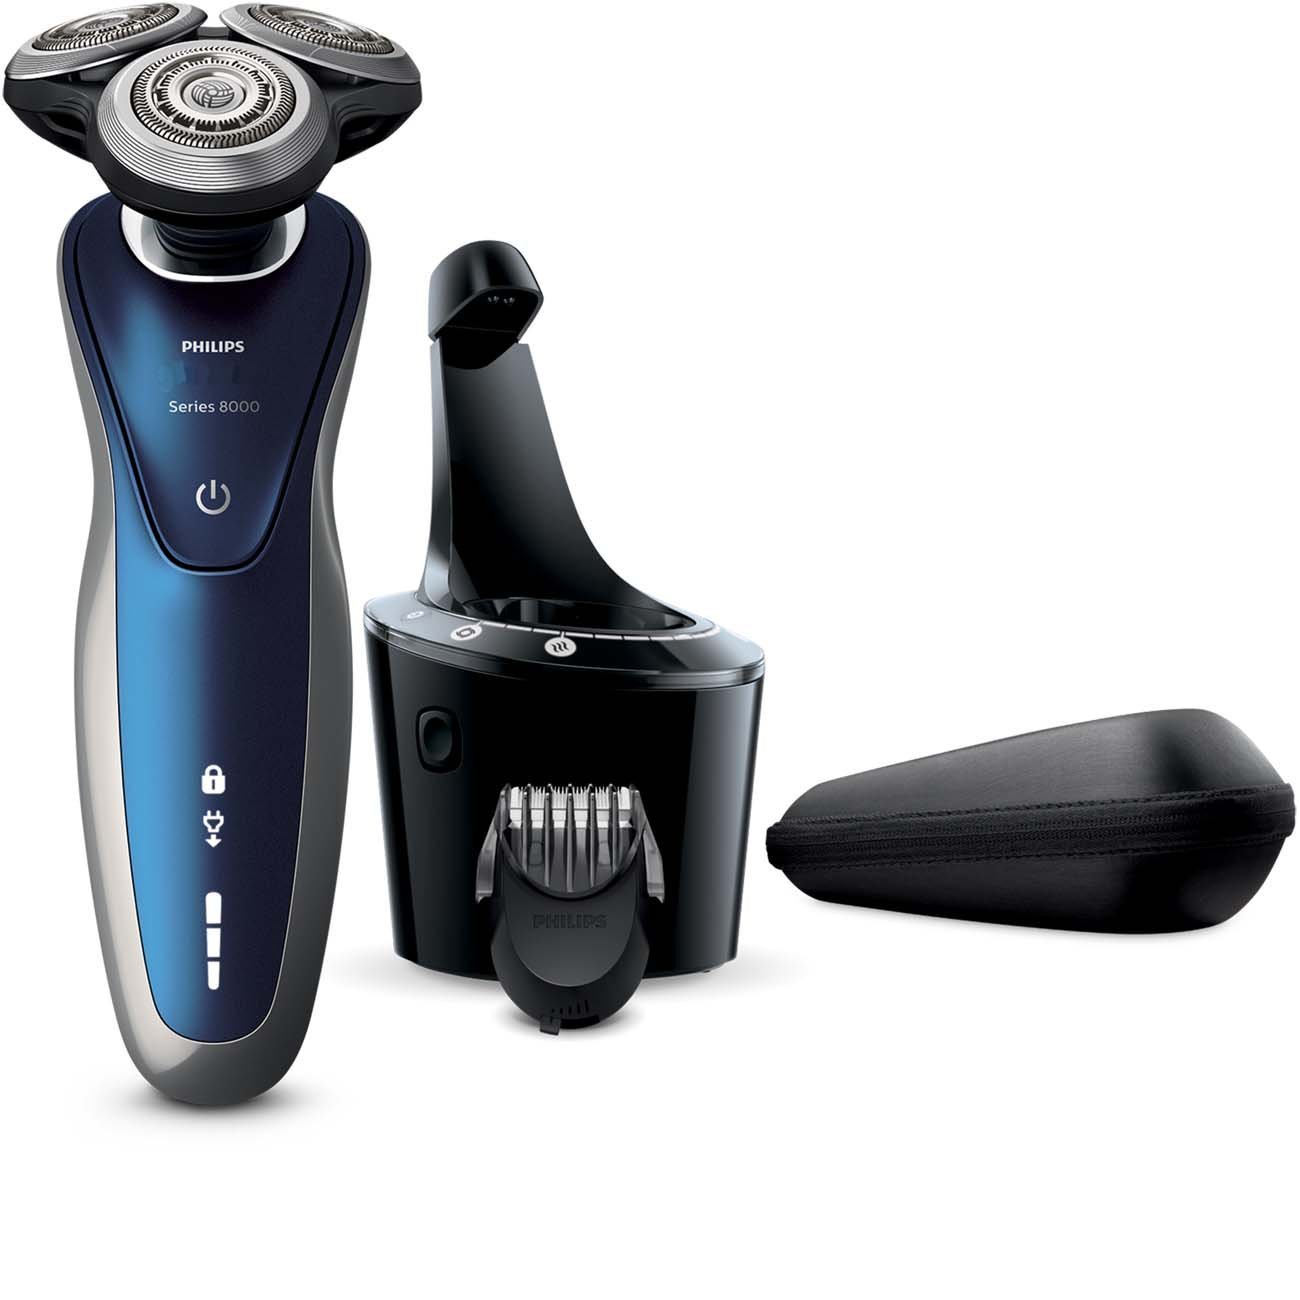 The 5 Best Philips Norelco Electric Shavers and Men’s Razors in 2023